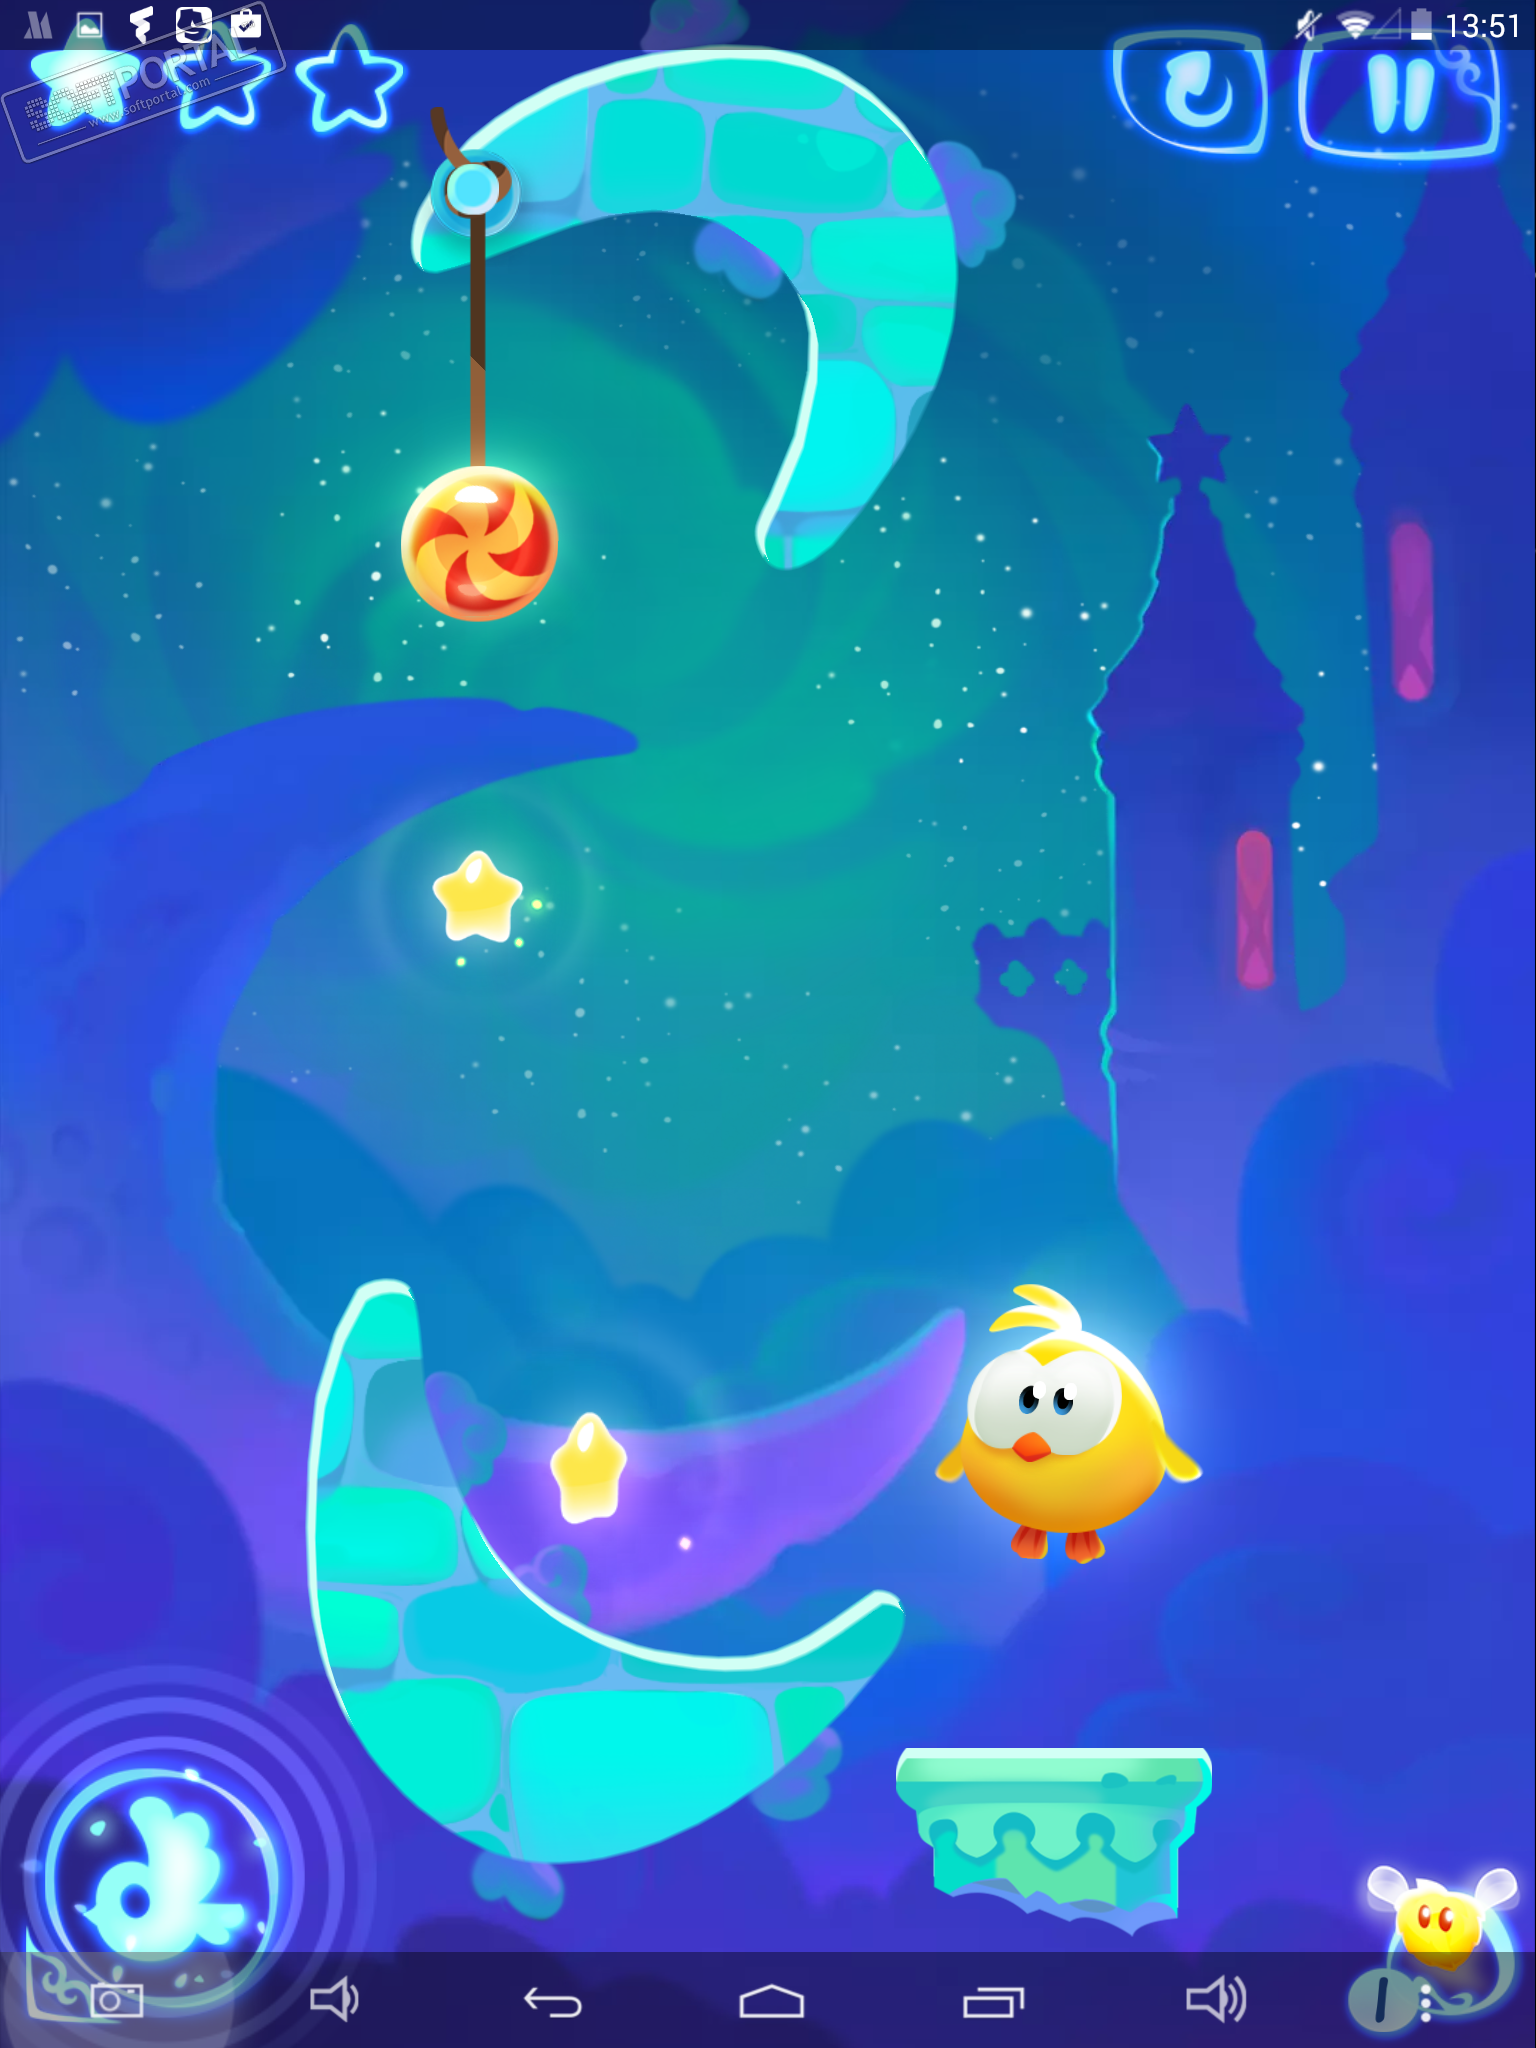 Download Cut The Rope: Magic Mod Apk v1.23.0 For Android